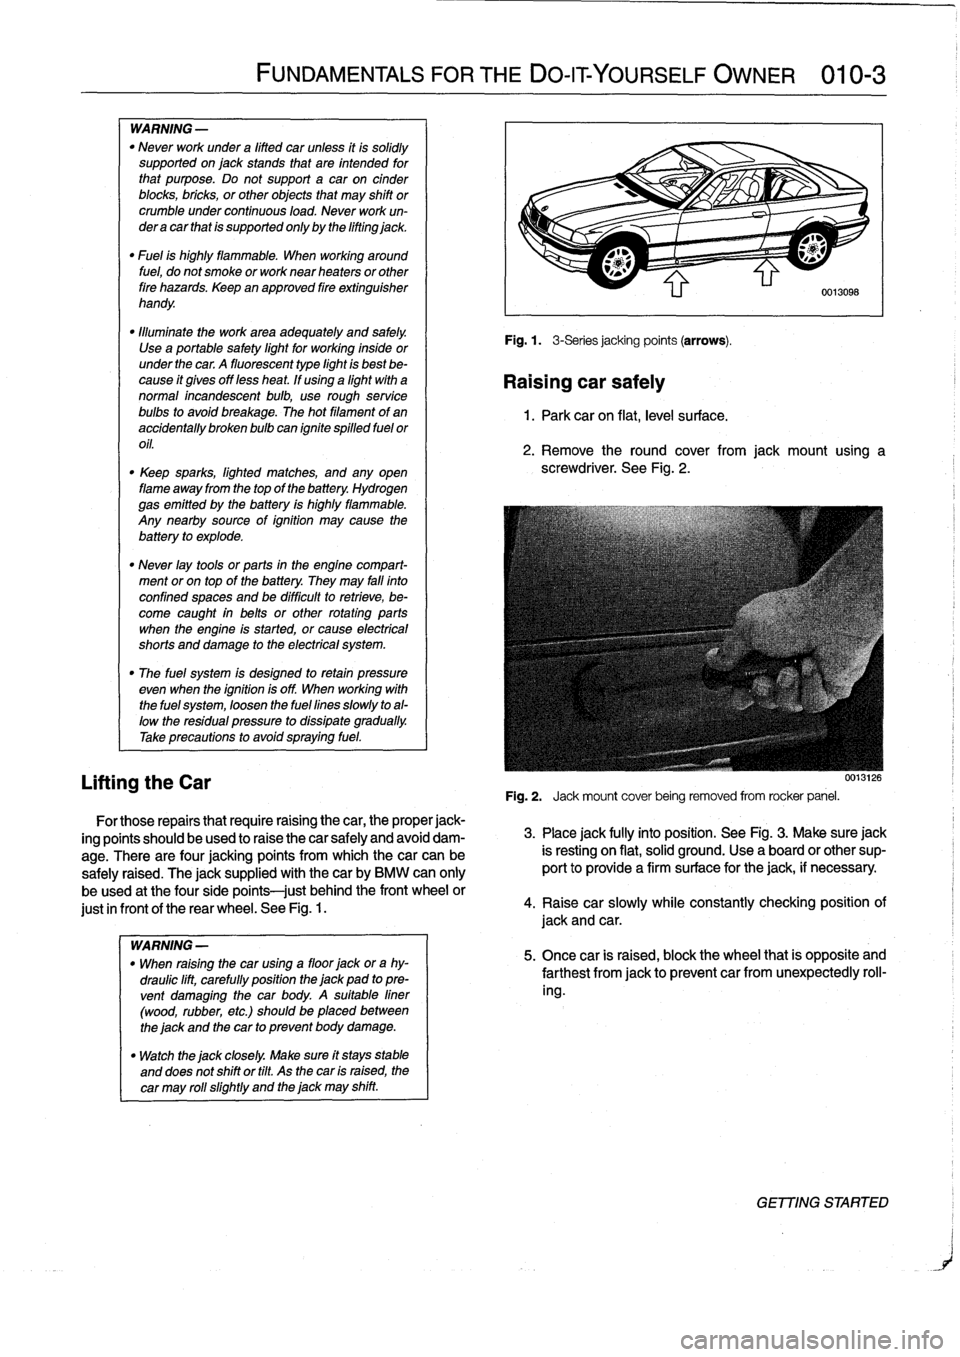 BMW 323i 1992 E36 Workshop Manual 
WARNING
-

"
Never
work
under
a
lifted
car
unless
it
is
solidly
supported
on
jack
stands
that
are
intended
for
that
purpose
.
Do
not
support
a
car
on
cinder
blocks,
bricks,
or
other
objects
that
may
